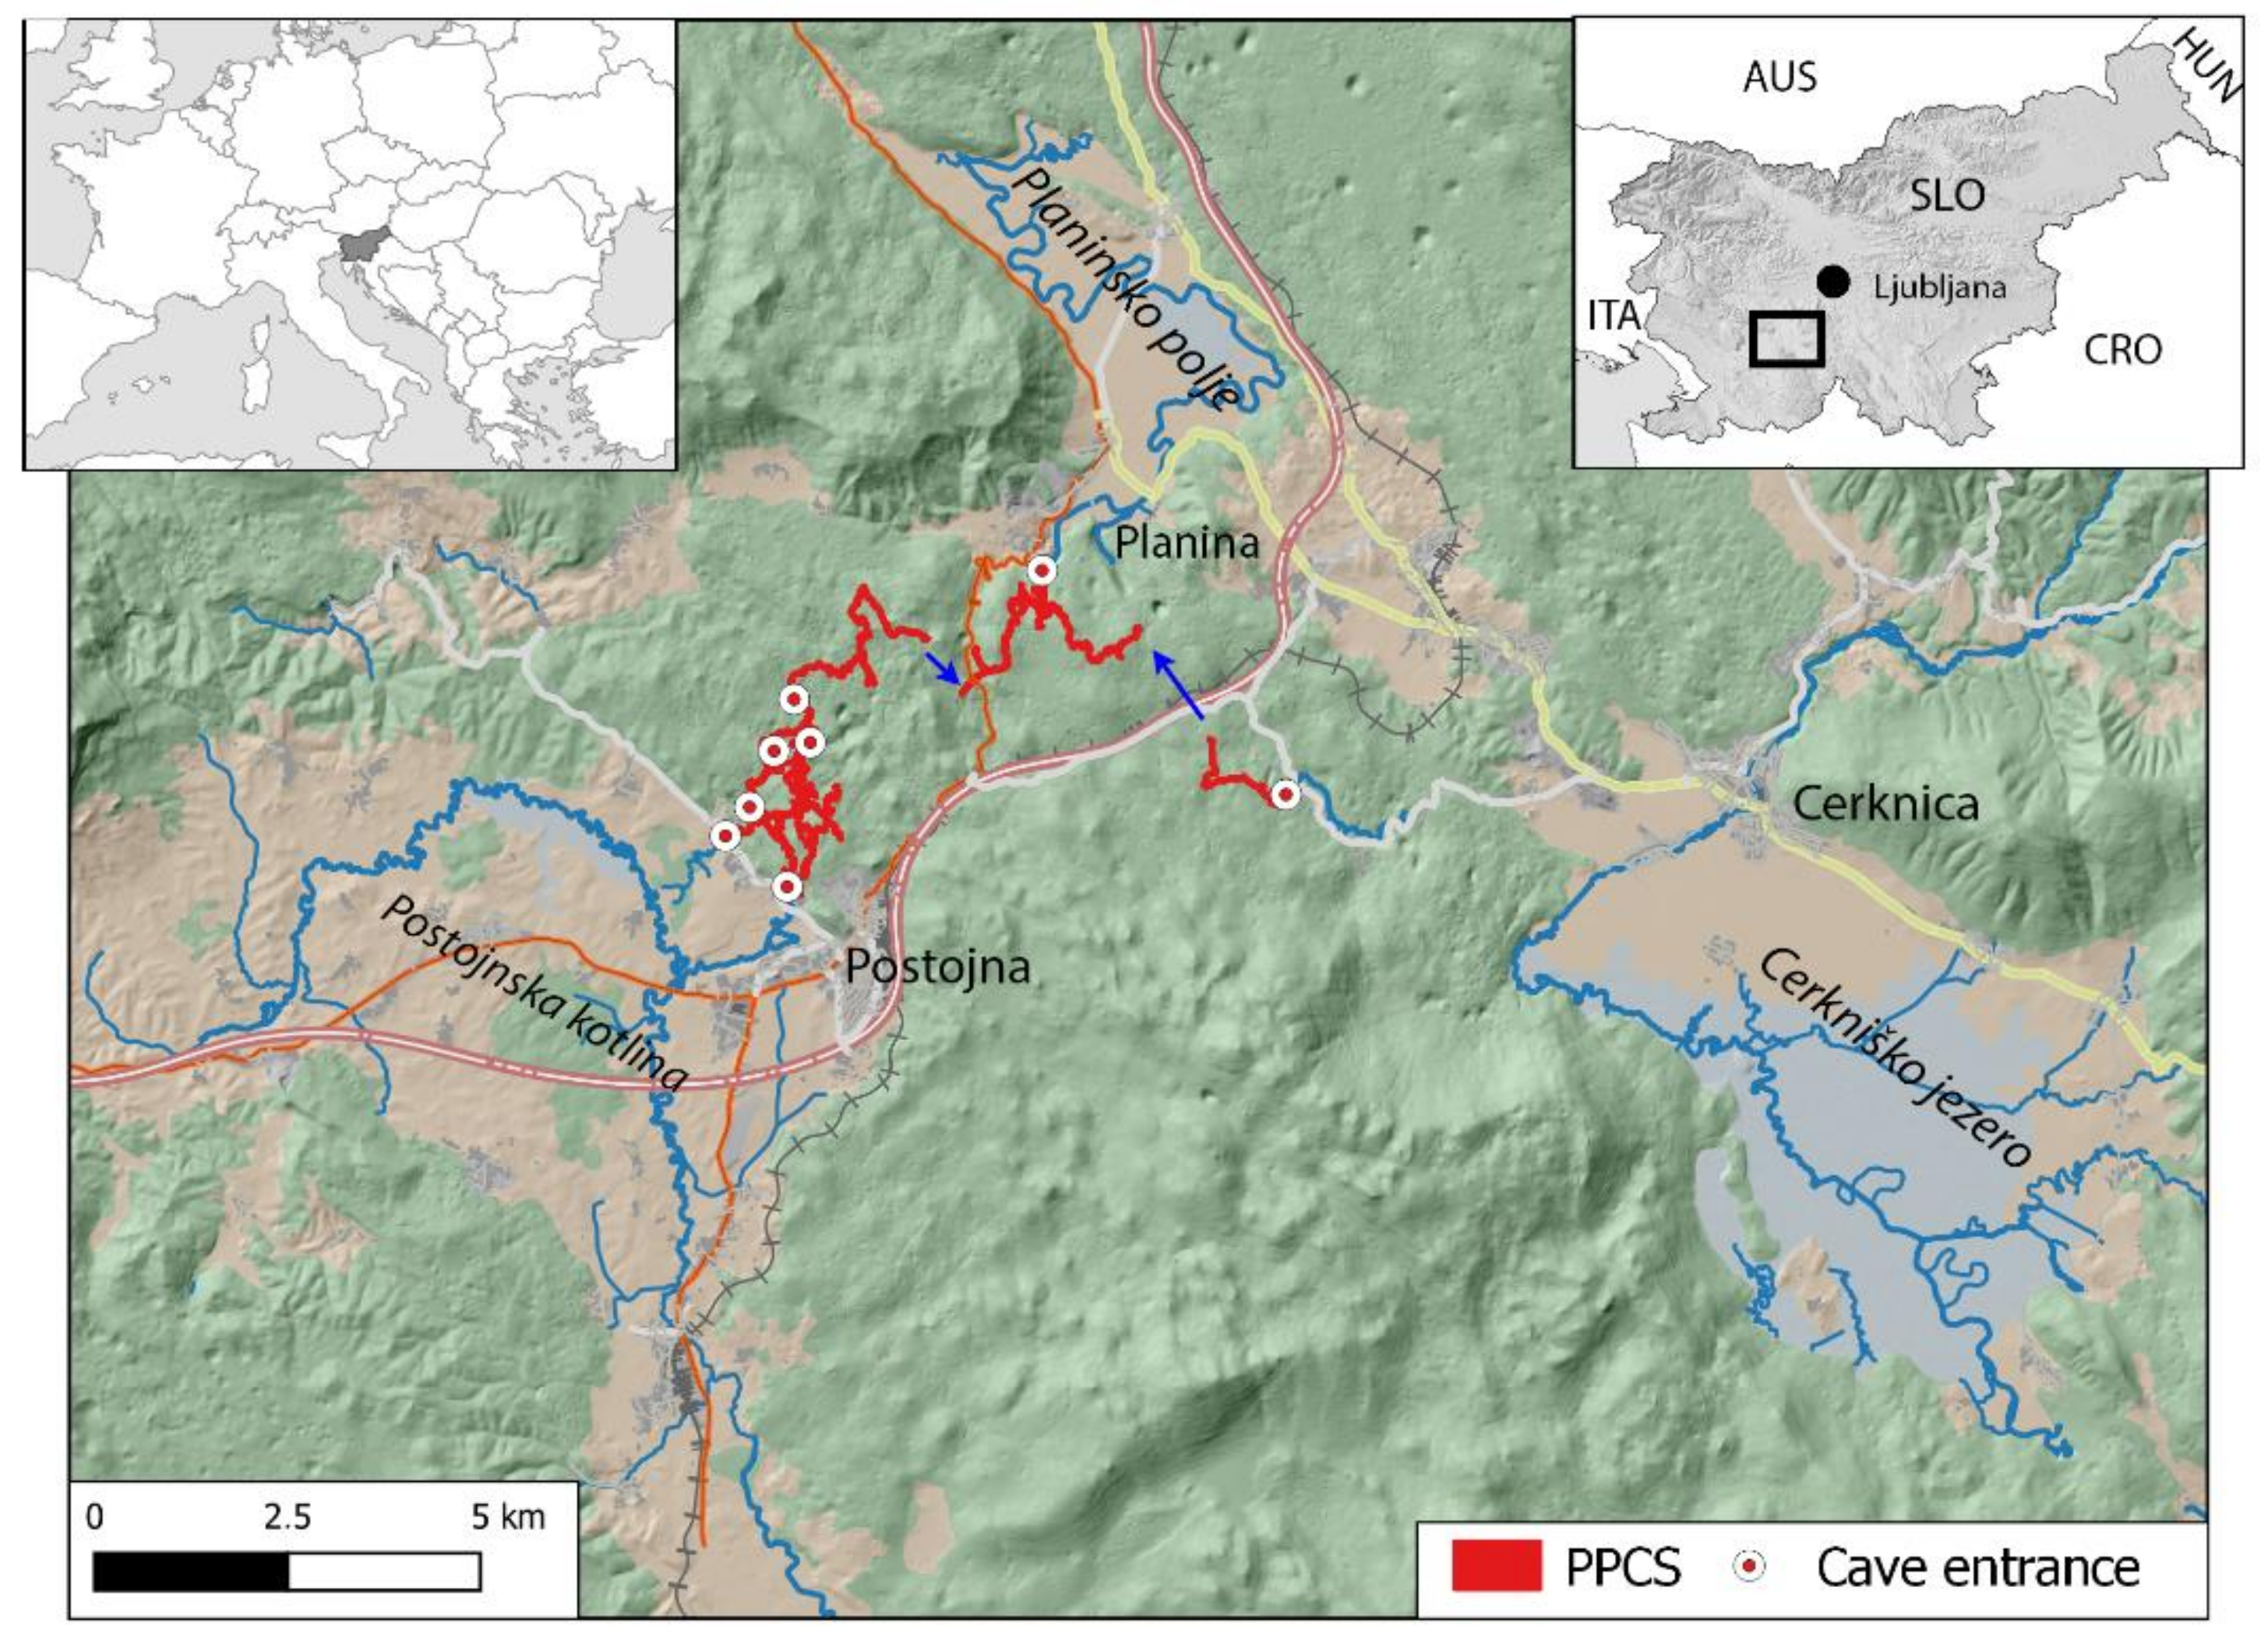 strong Figure 1/strong br/ p Location of the Postojna-Planina Cave System i...